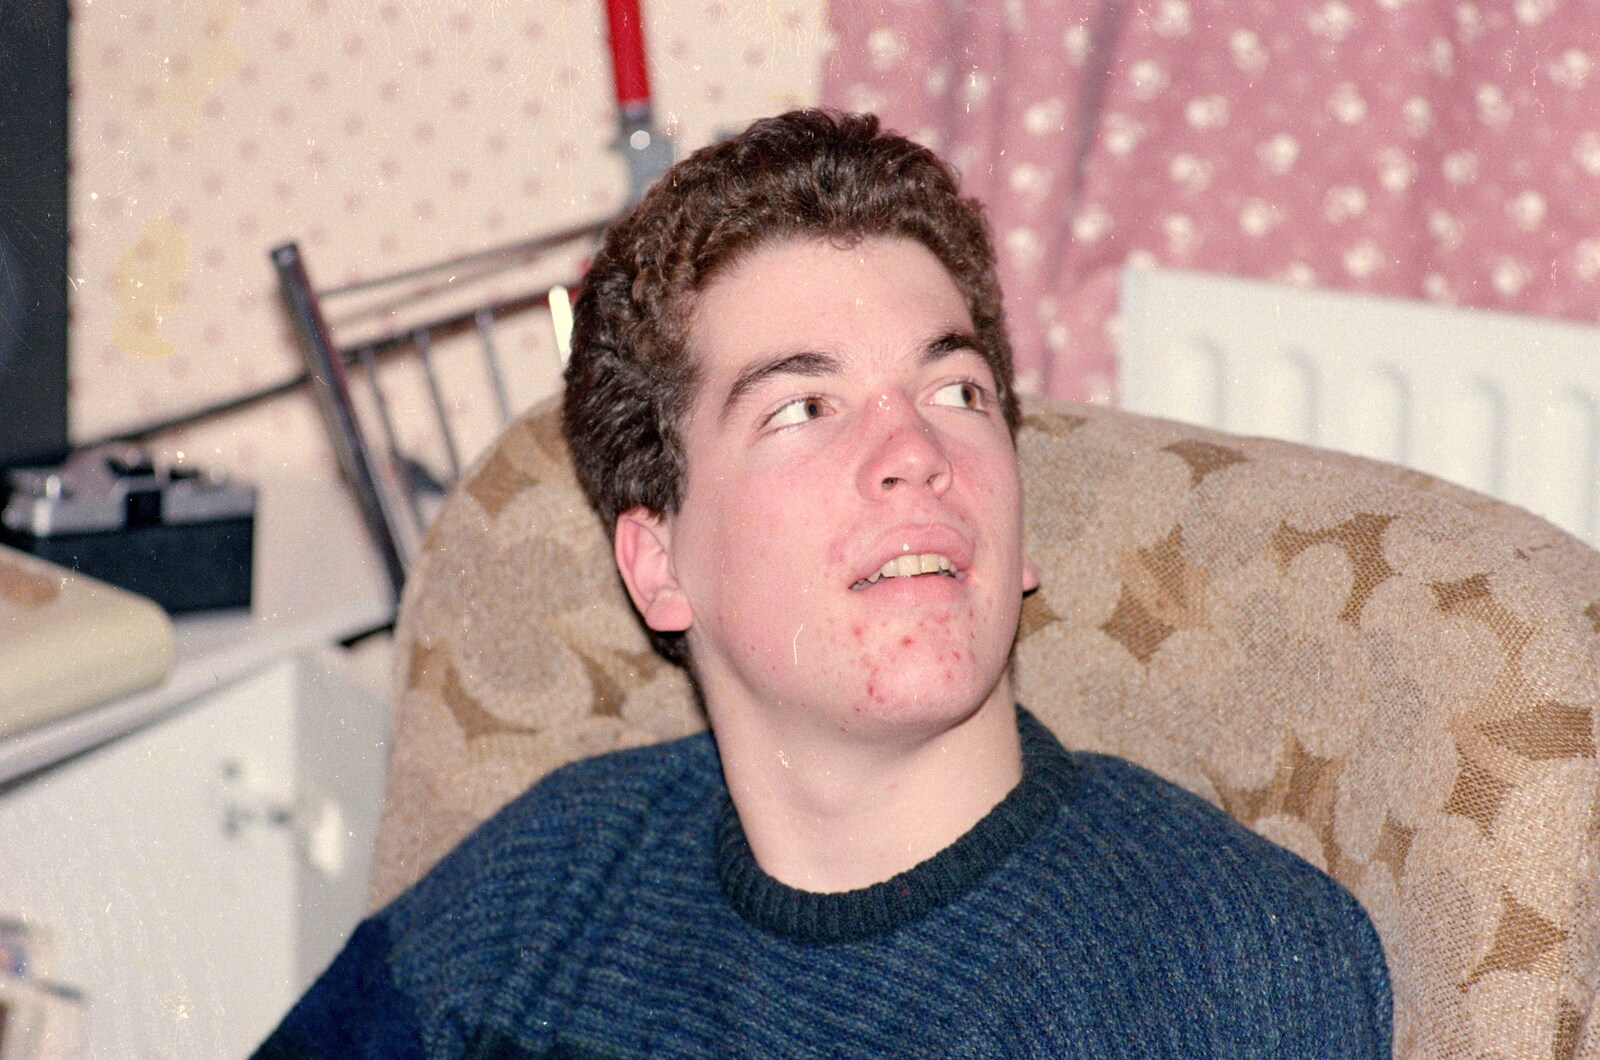 Jon the Hair looks up near a VIC-20 from Ford Cottage Pre-Christmas, Barton on Sea, Hampshire - 19th December 1985